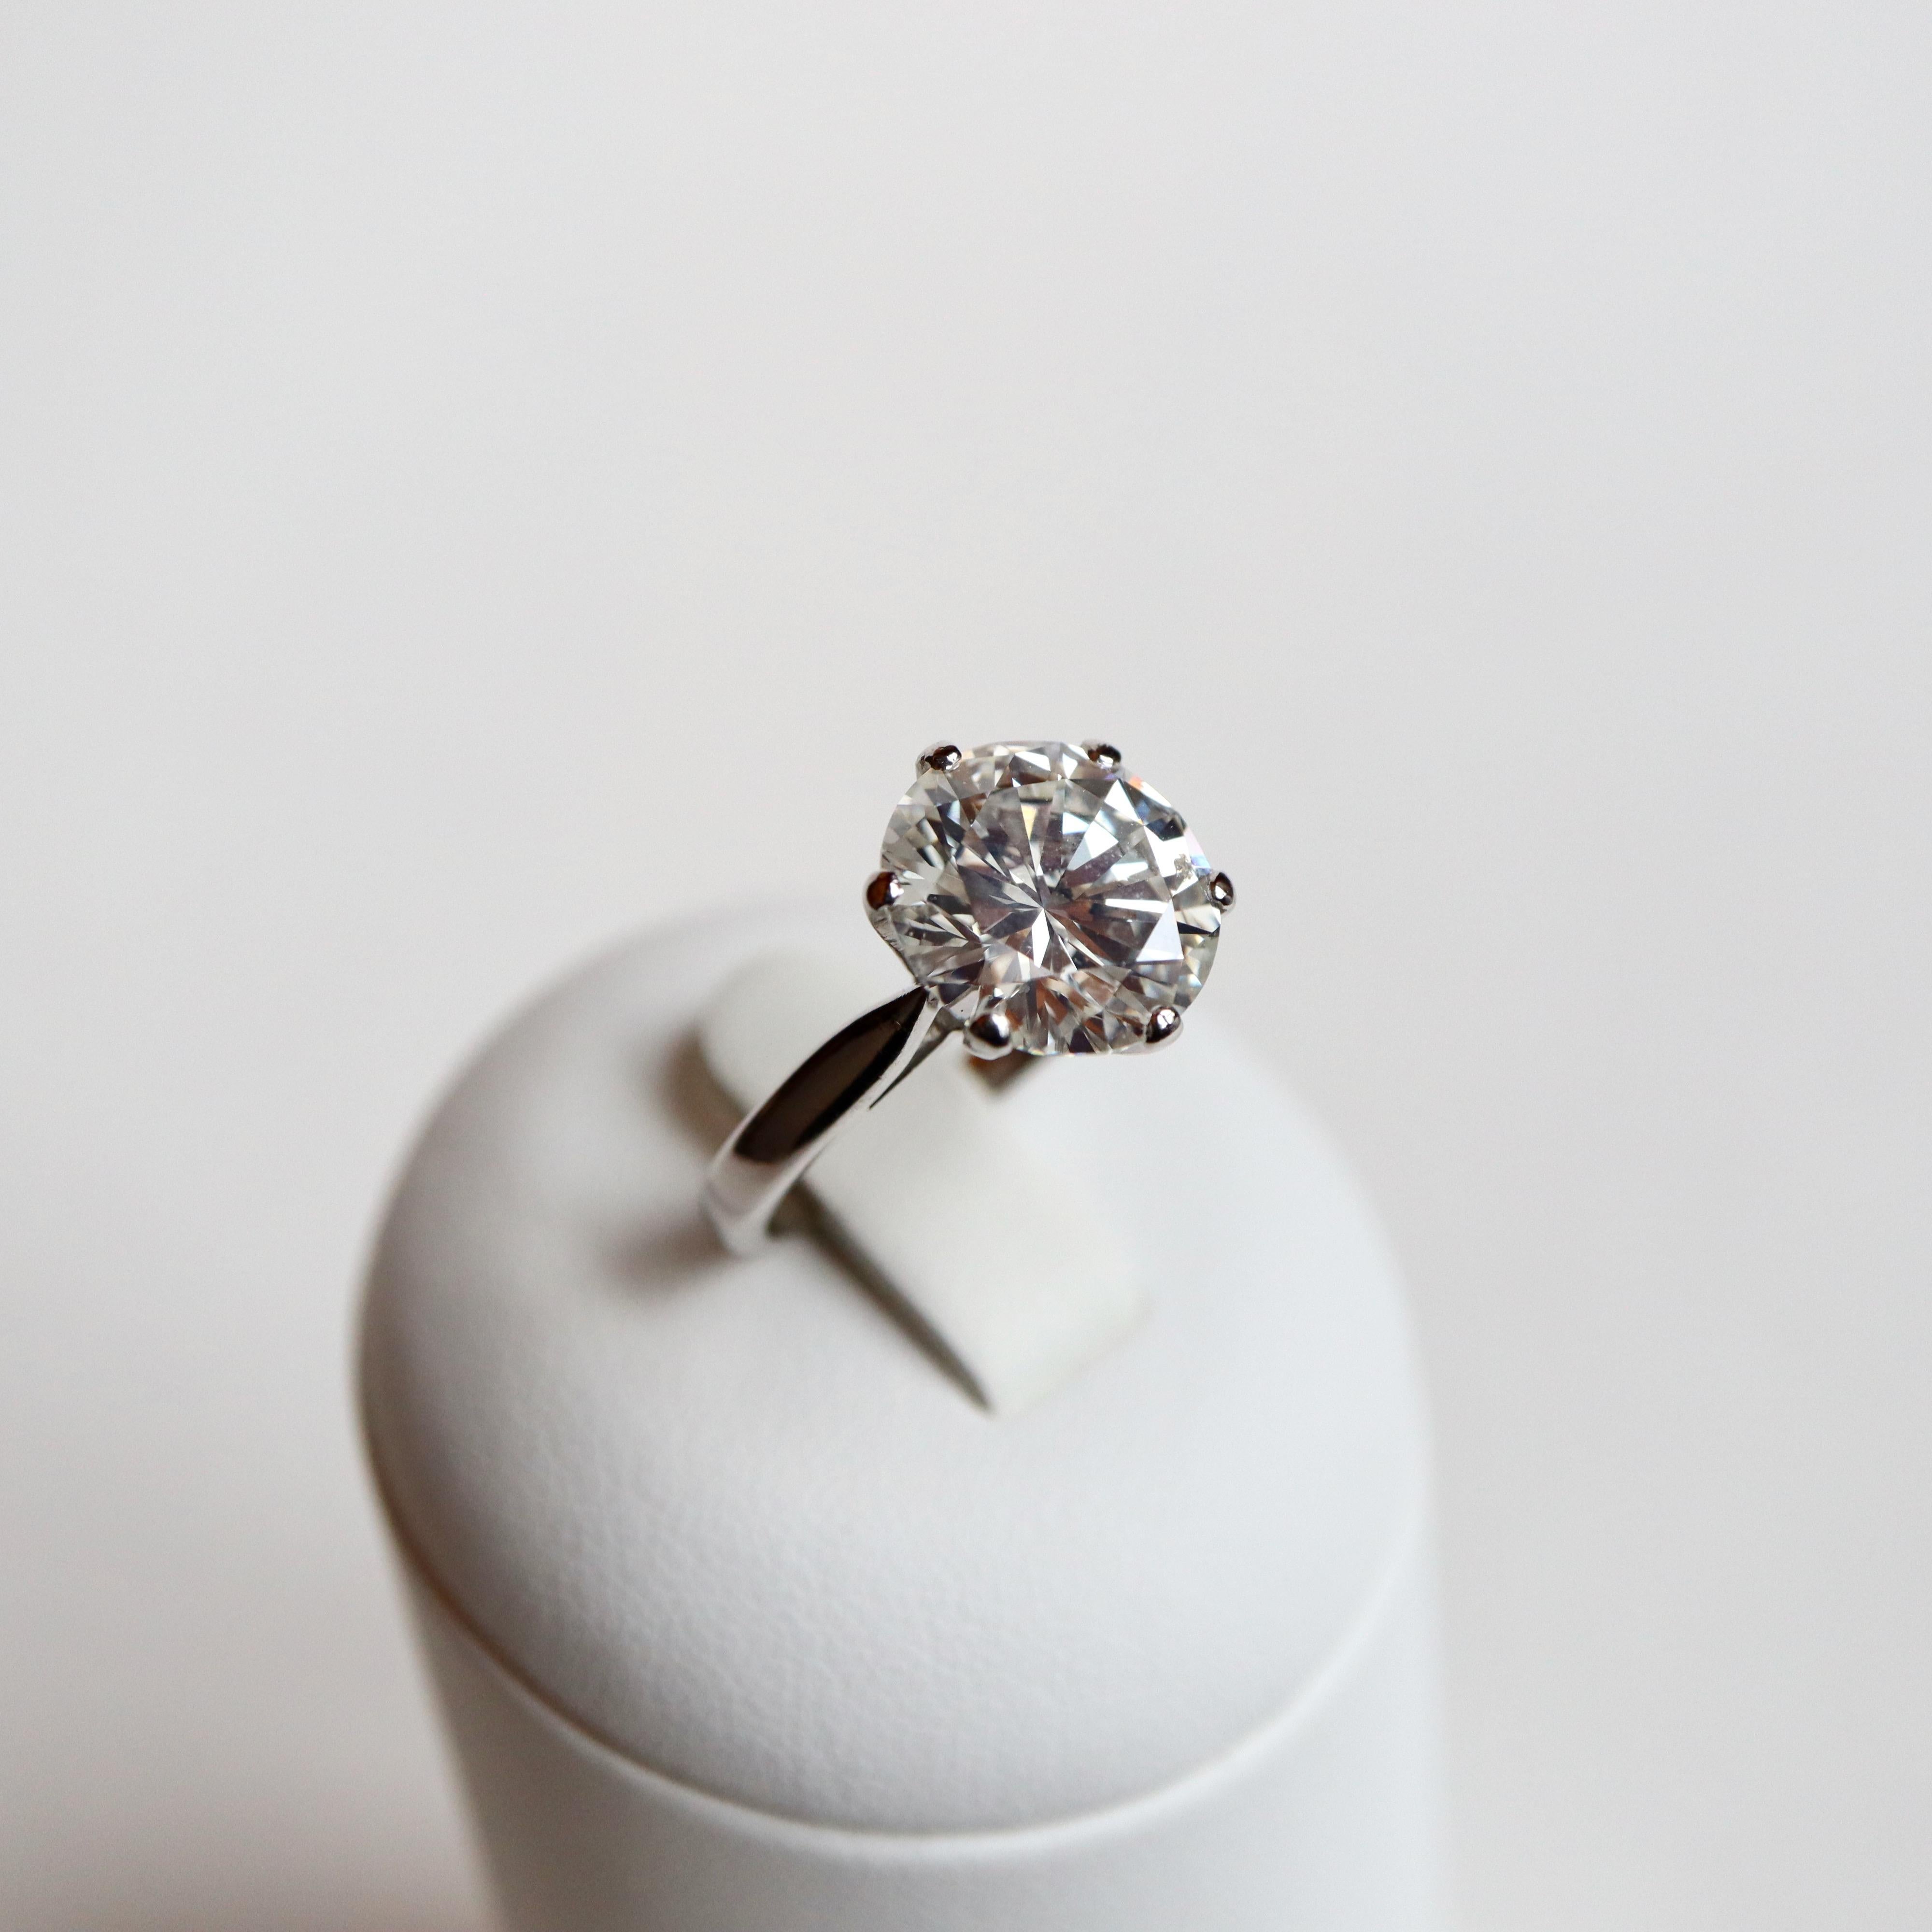 Solitaire Ring with a 5.23 Carat Diamond in the Center For Sale 1